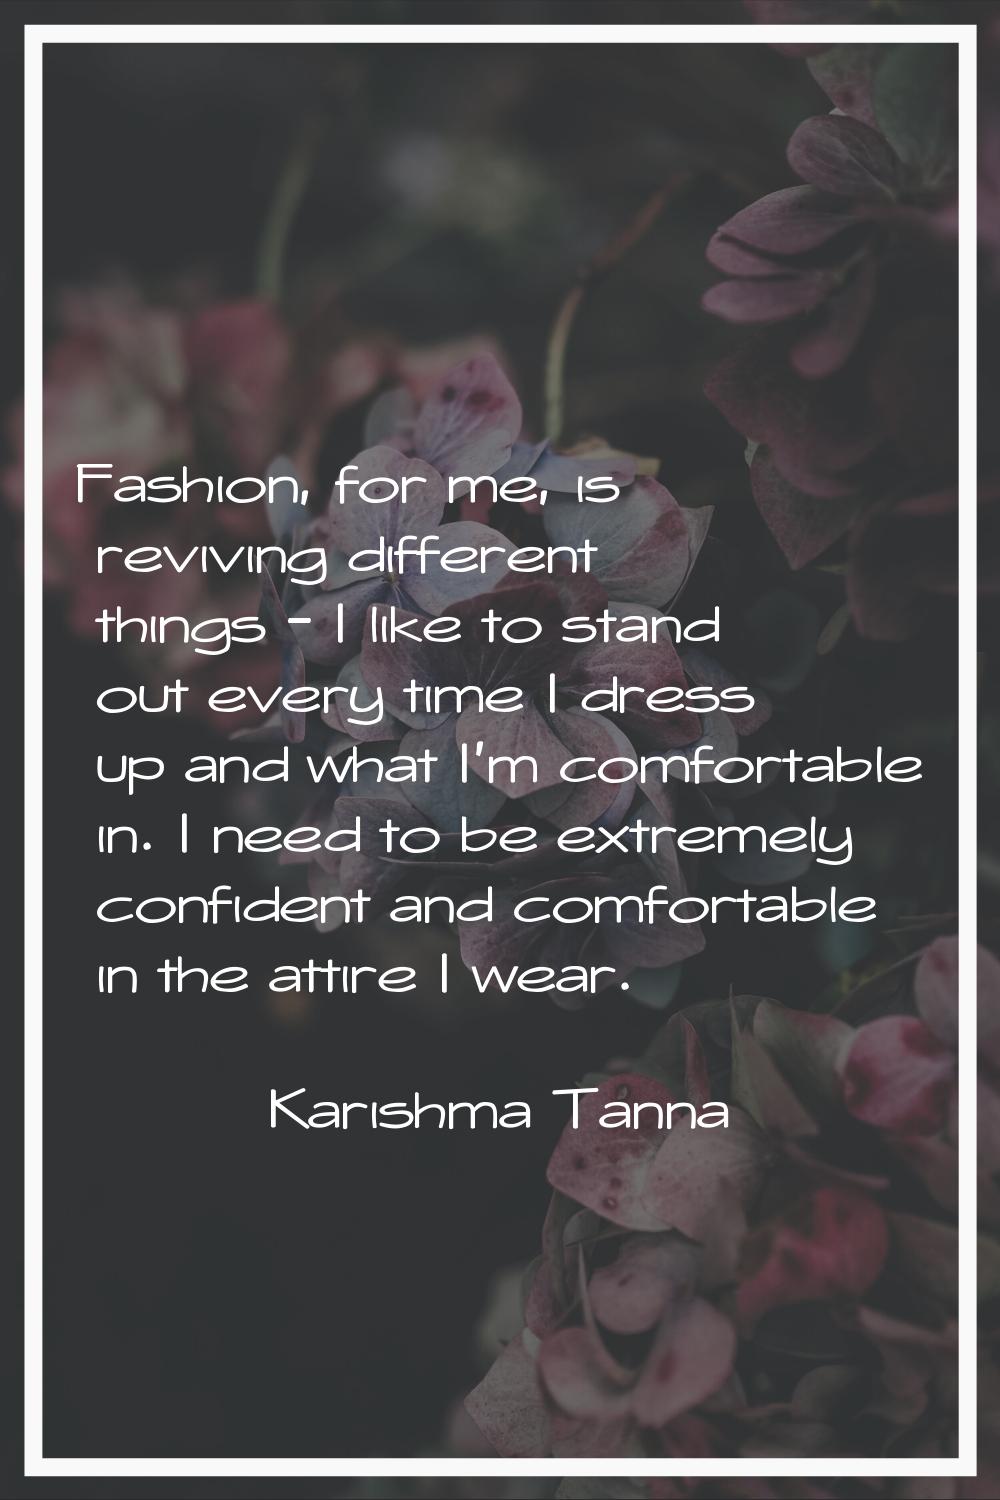 Fashion, for me, is reviving different things - I like to stand out every time I dress up and what 